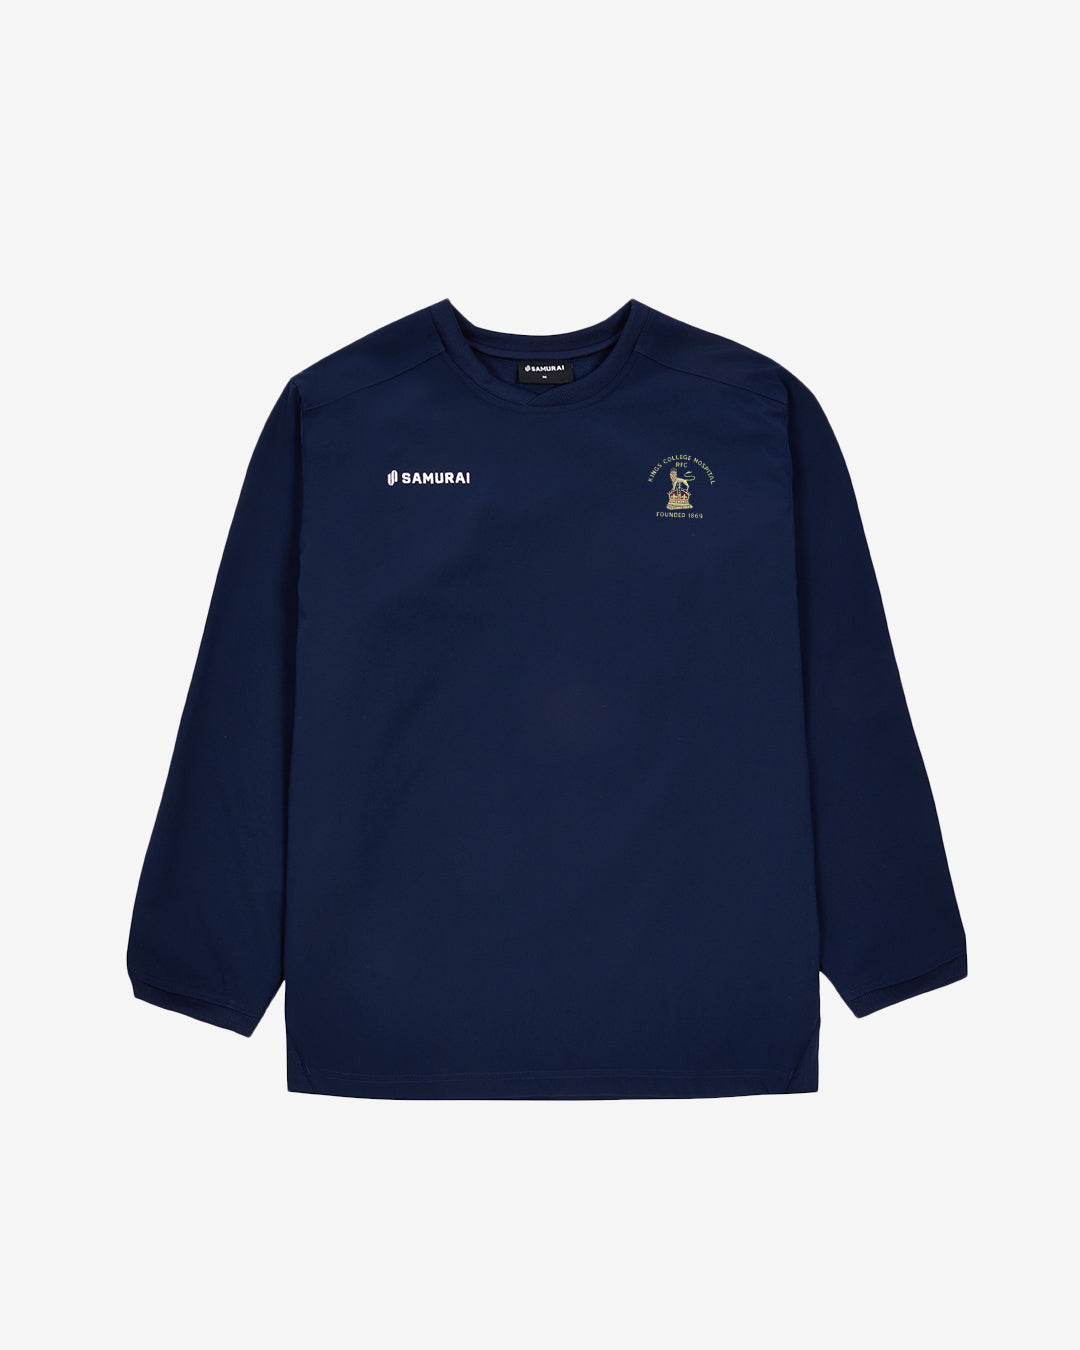 Kings College Hospital - EP:0107 - Shield Training Top - Navy